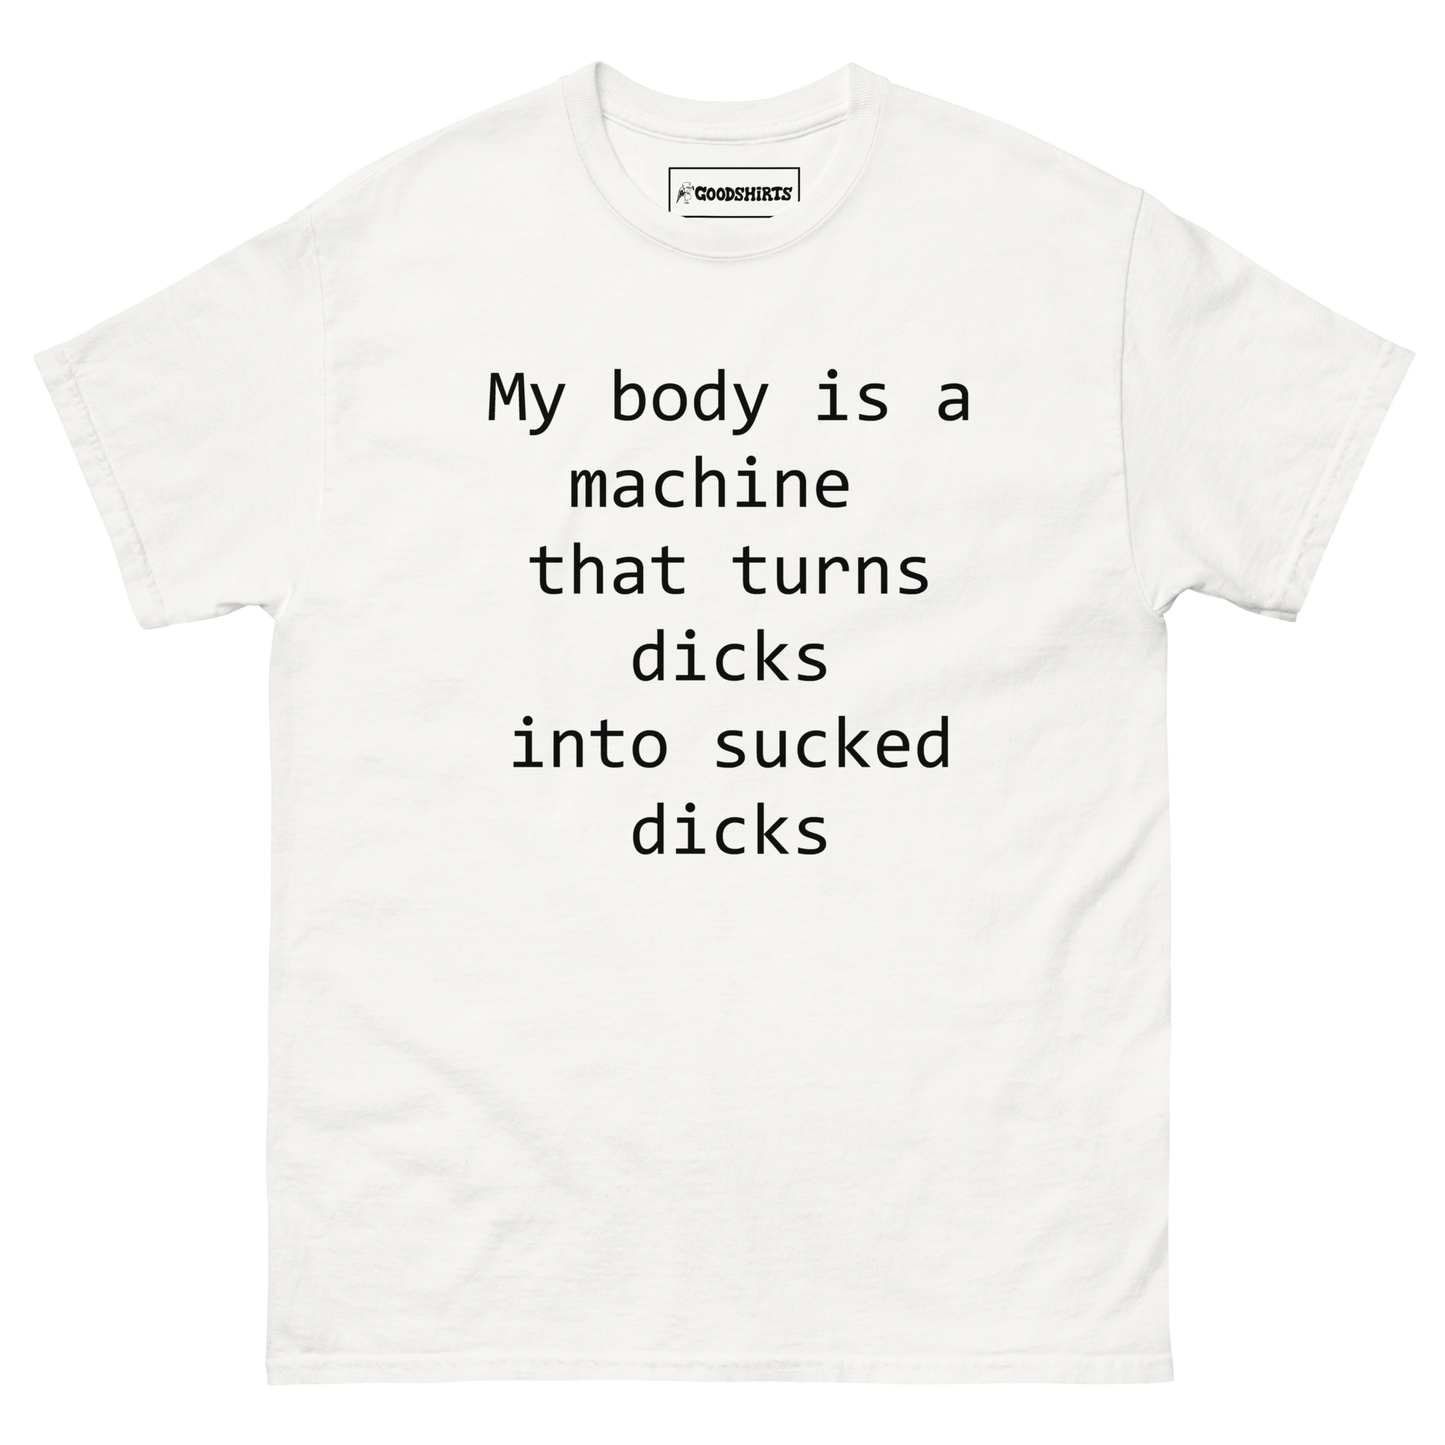 My body is a machine that turns dicks into sucked dicks.